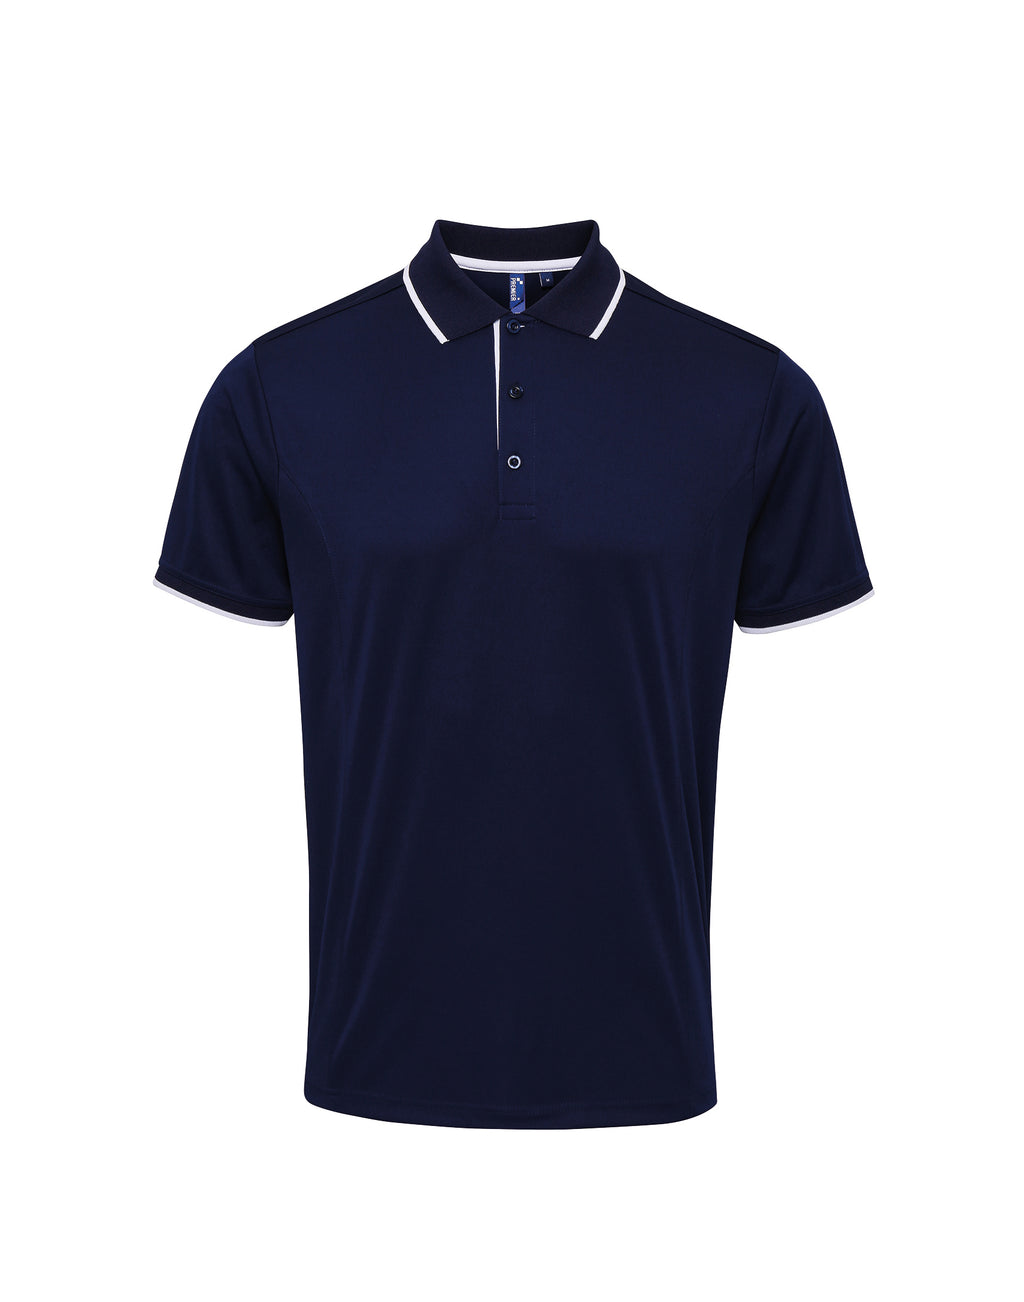 Business Casual Navy Polos for Men